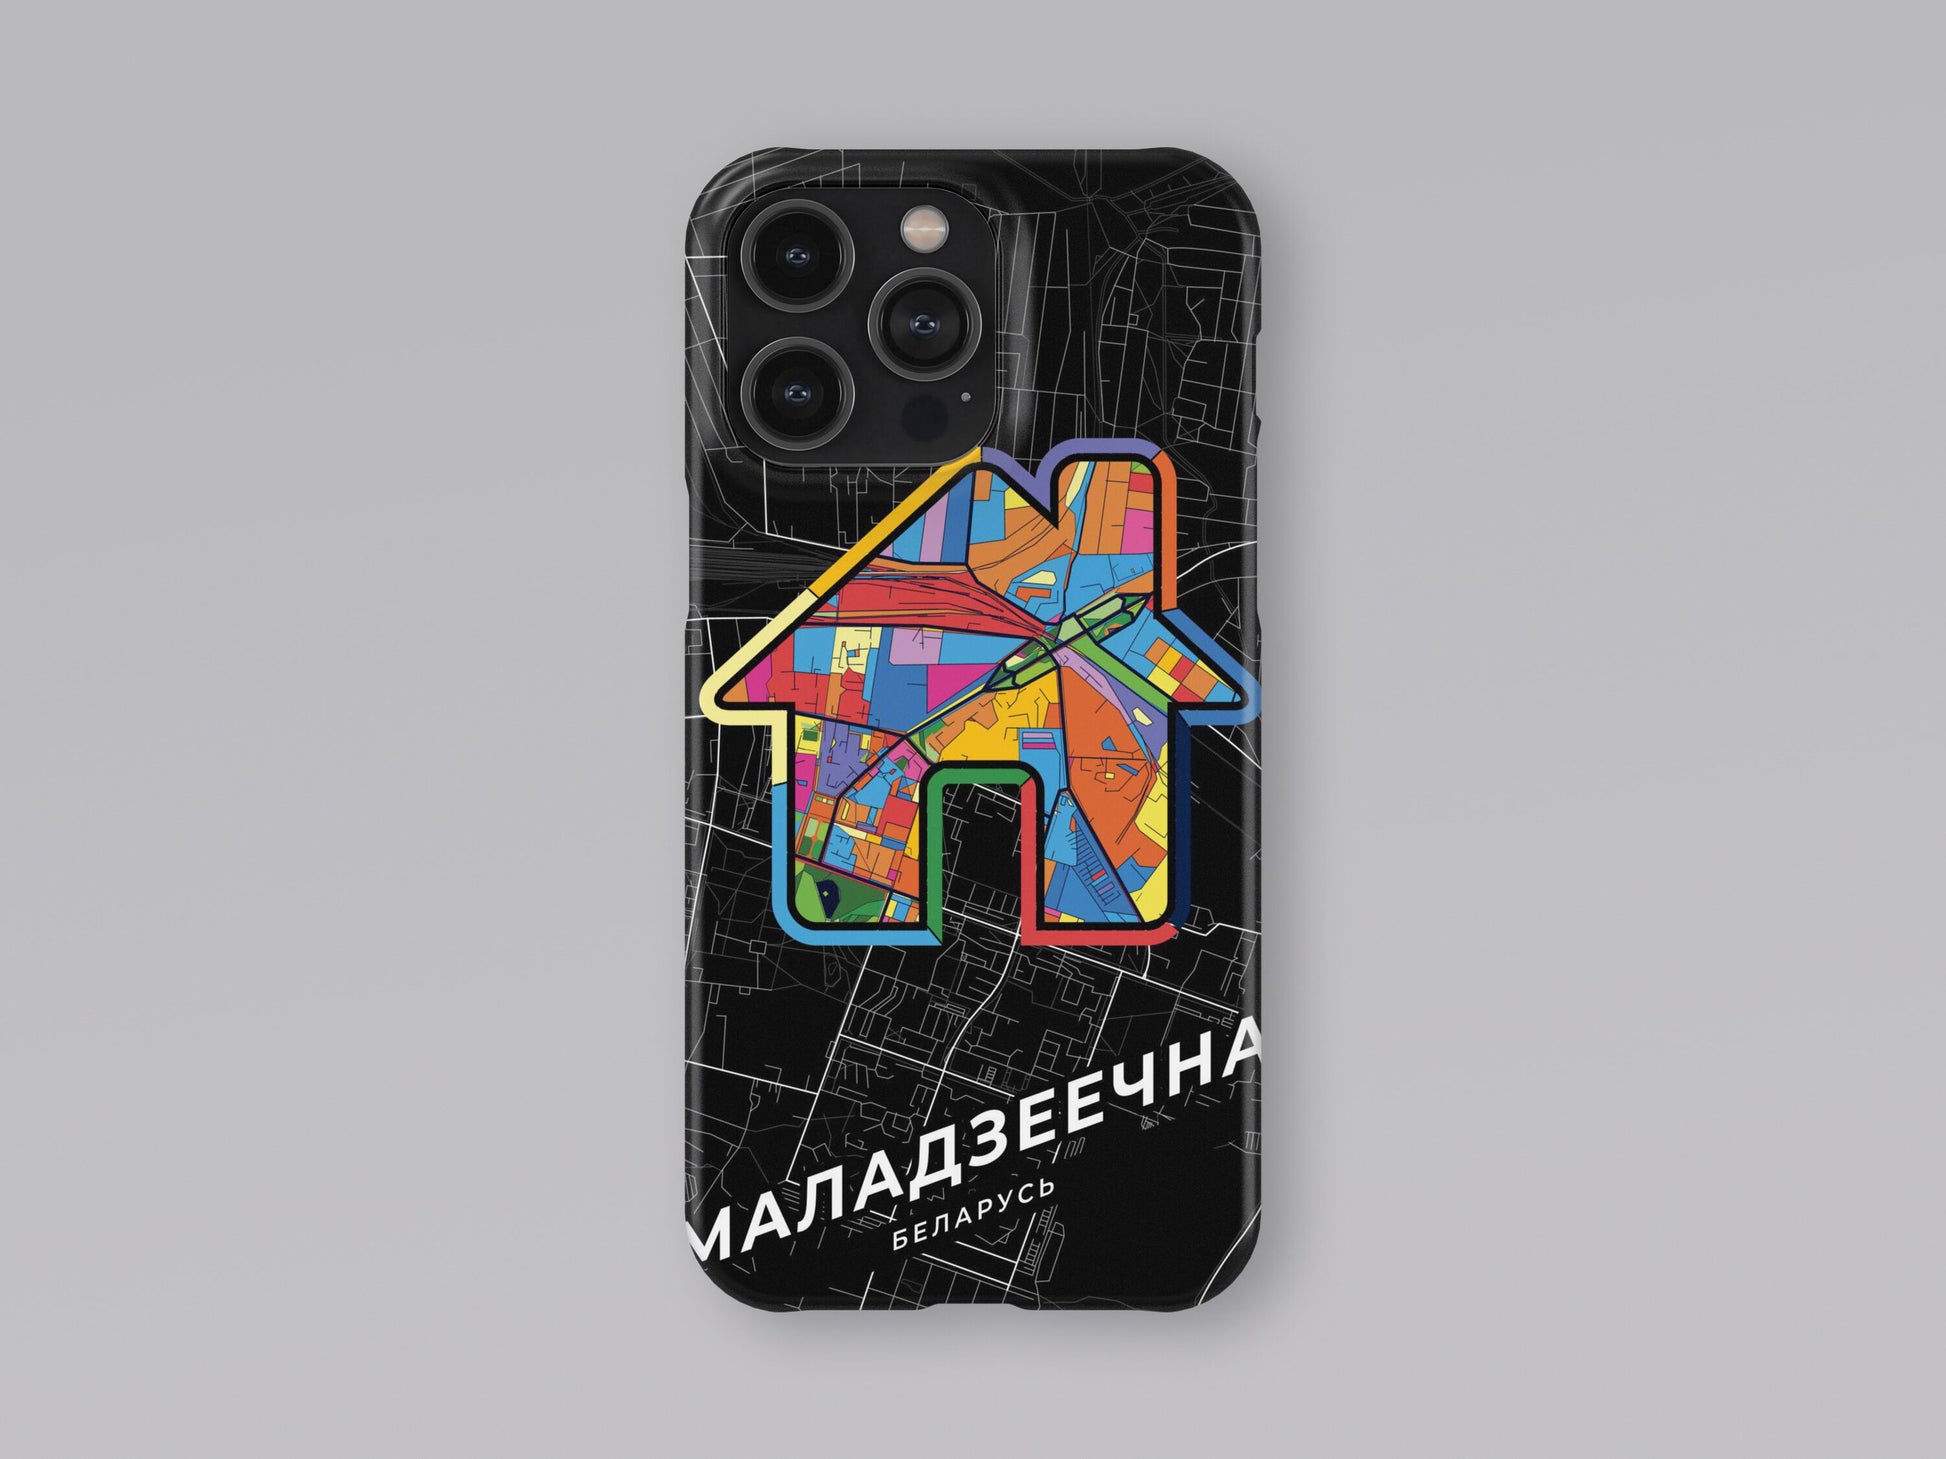 Маладзеечна Беларусь slim phone case with colorful icon. Birthday, wedding or housewarming gift. Couple match cases. 3